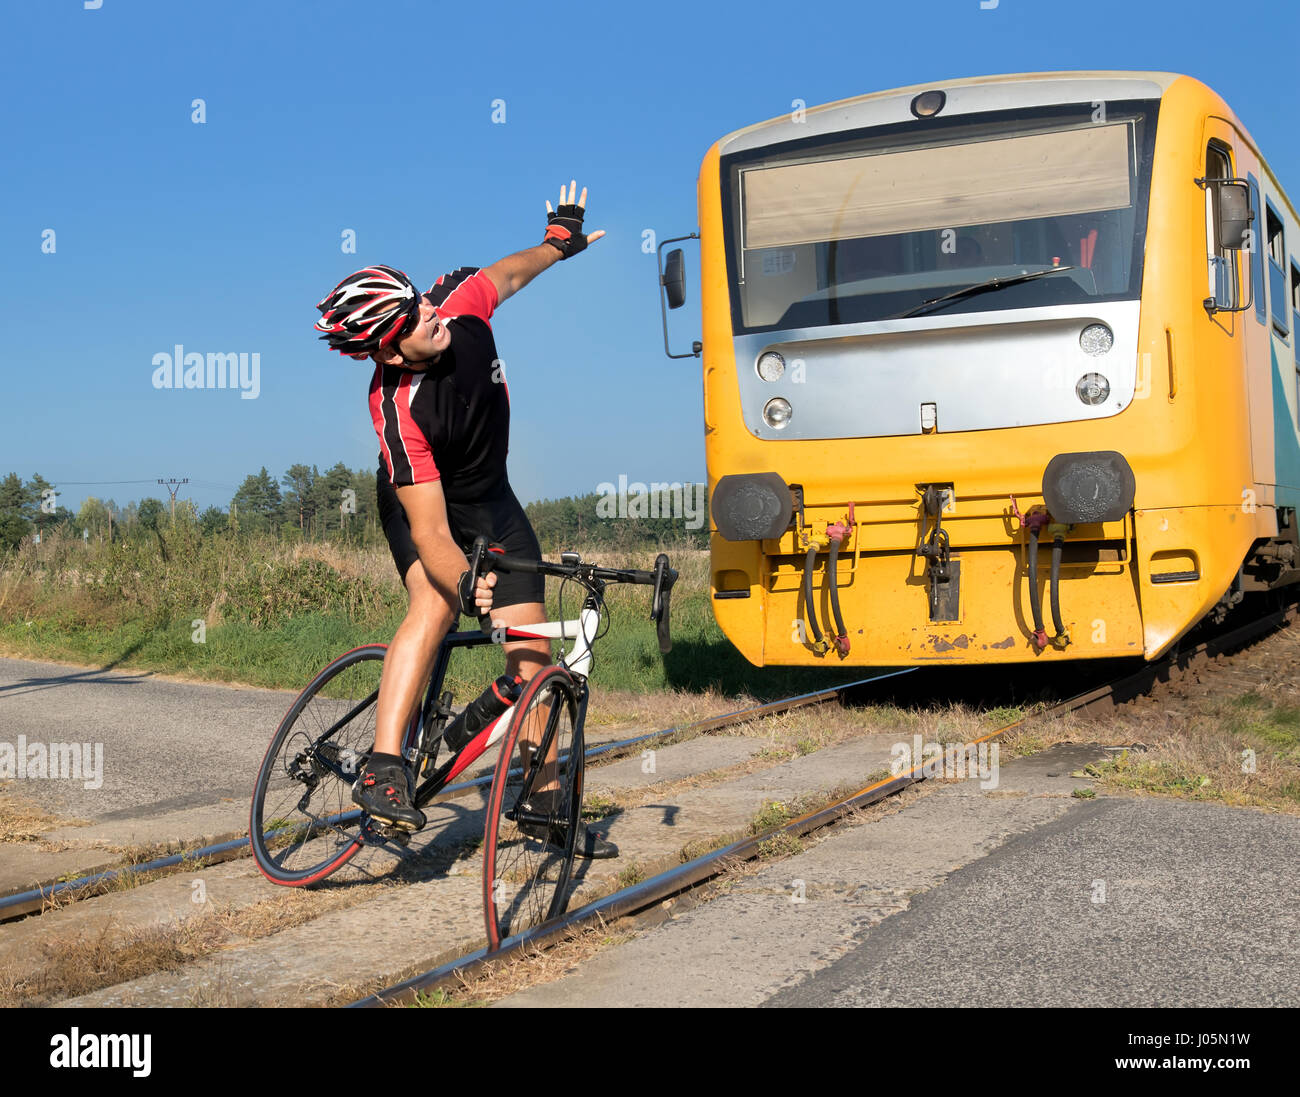 Unhappy cyclist has trouble on the railway crossing on Which the train is coming. The train goes to the cyclist stuck in the tracks. Stock Photo